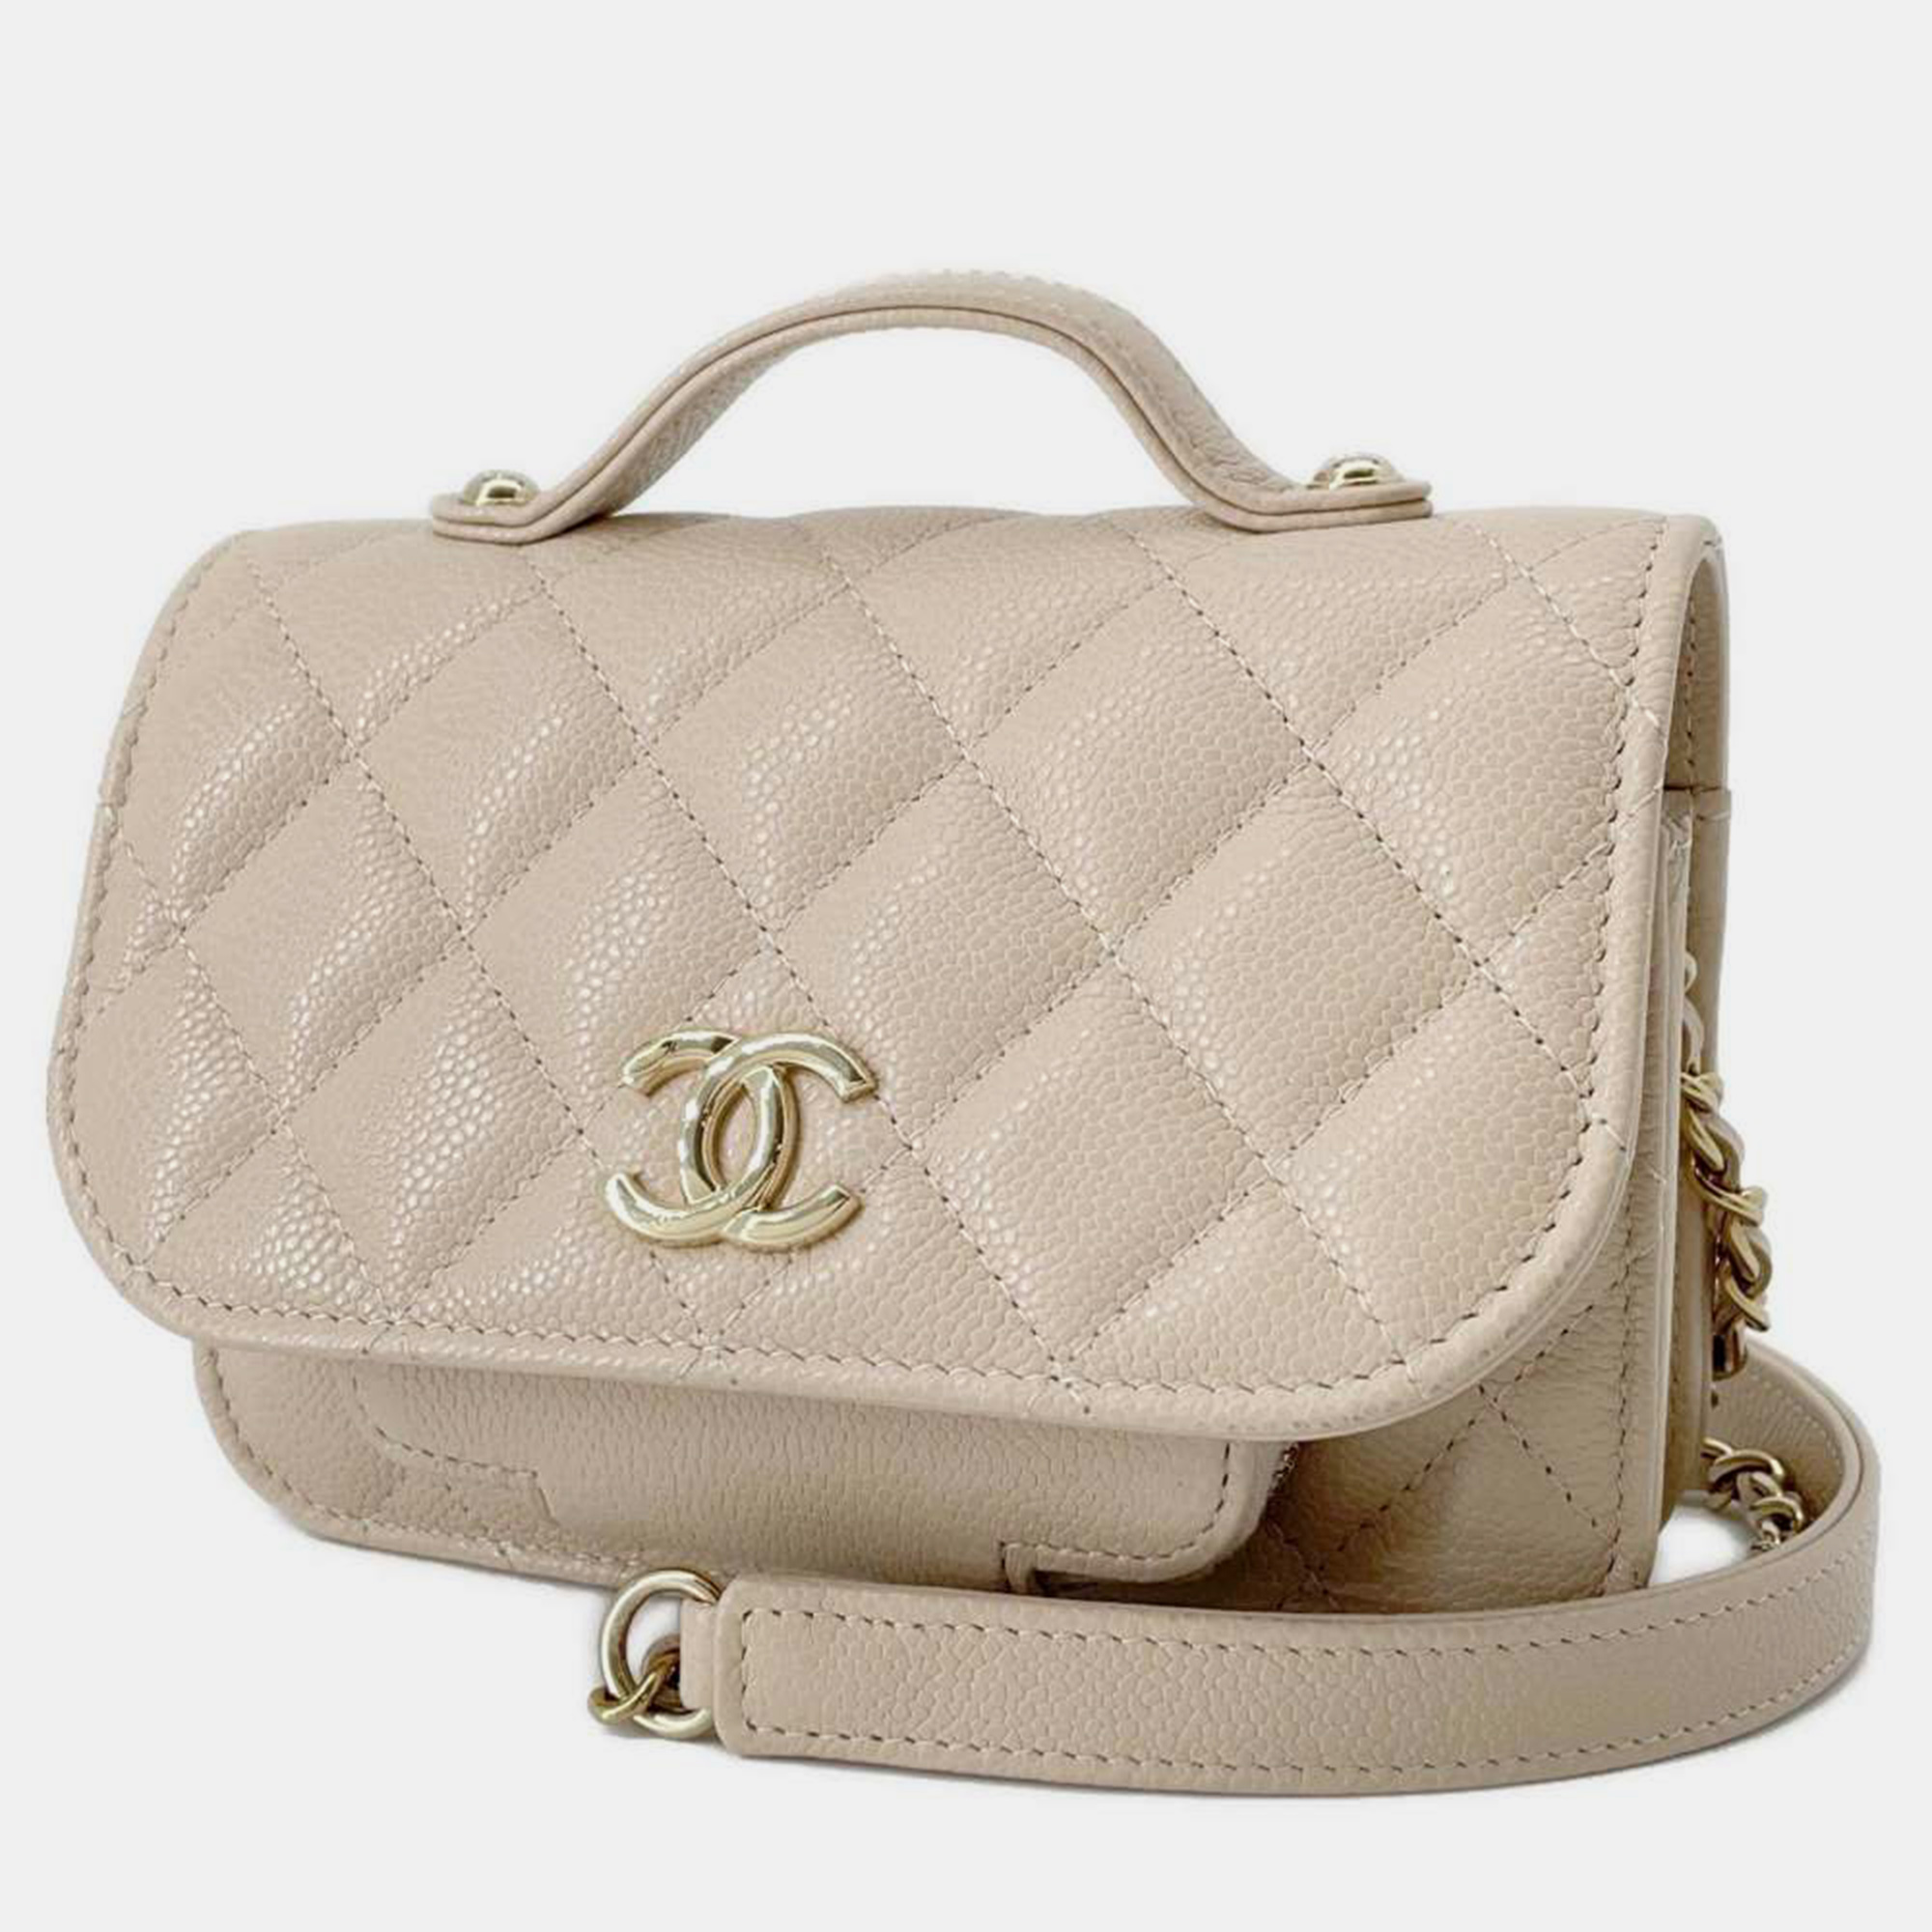 Chanel beige caviar leather business affinity flap bag